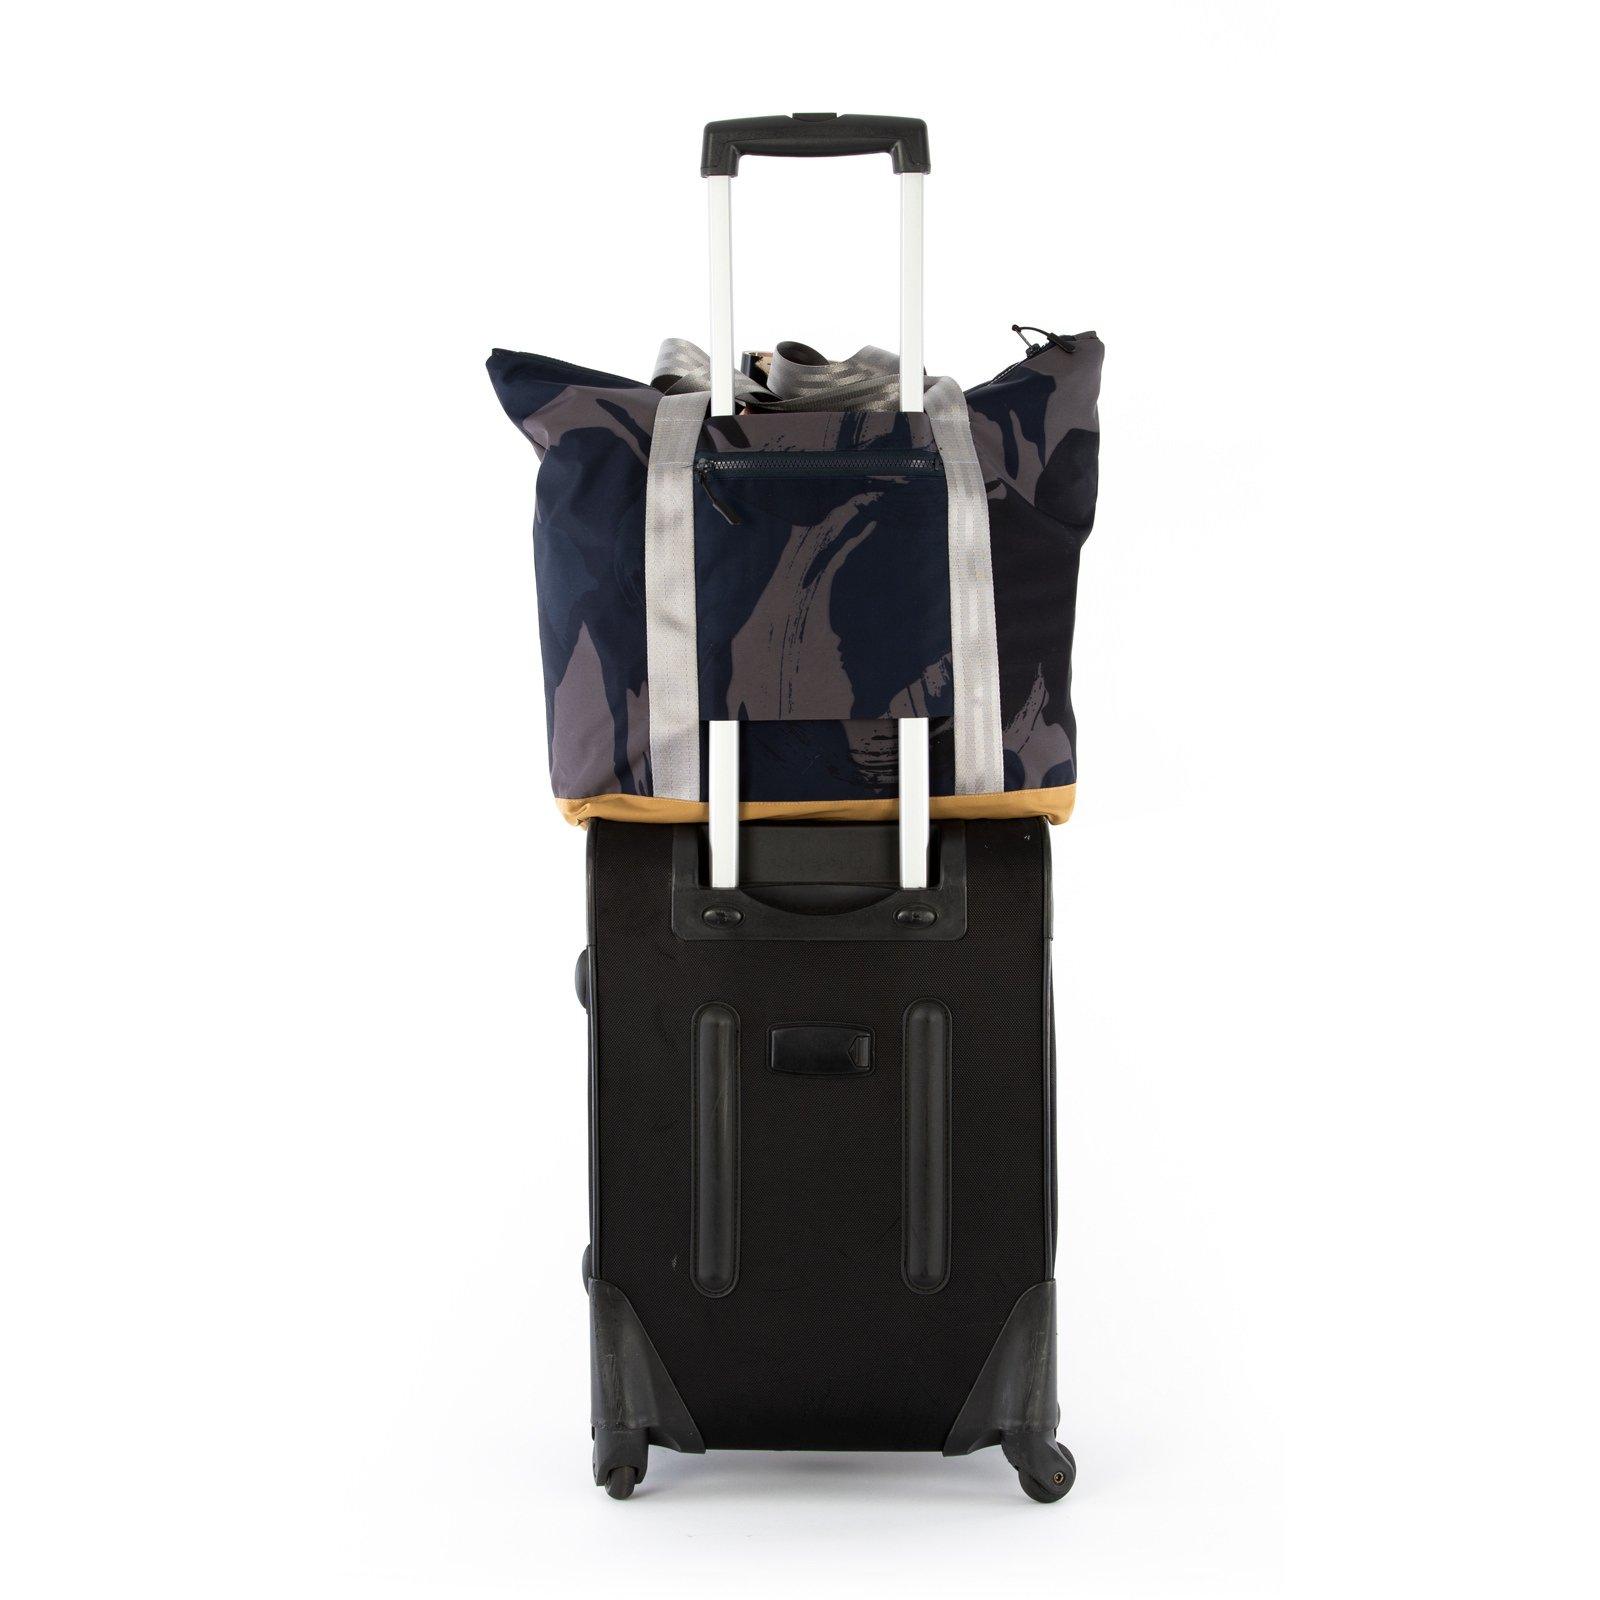 GALAXIE 3 - SUPERNOVA (LARGE) - The Perfect Carry-On!